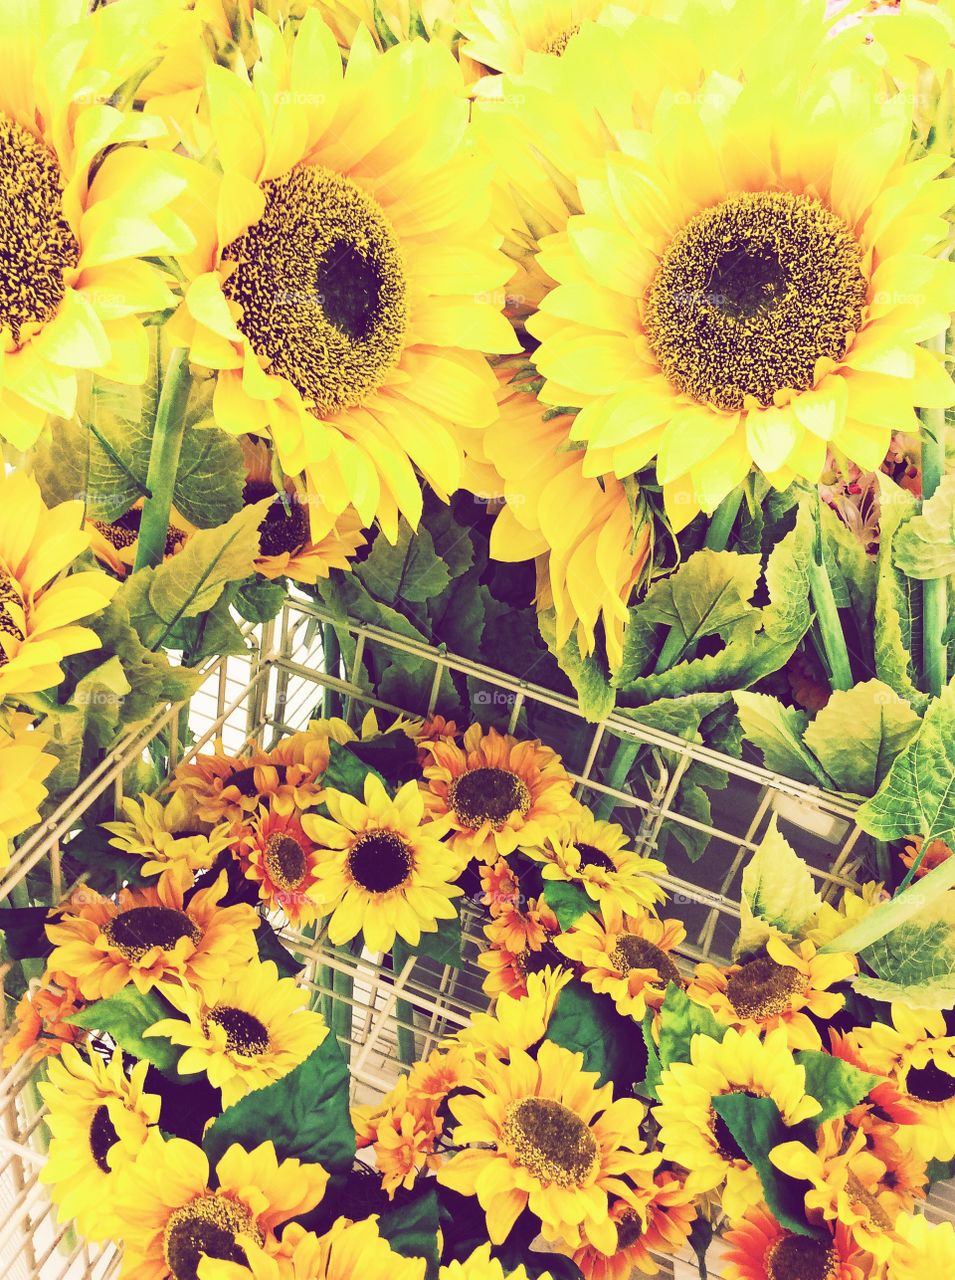 Surrounded by sunflowers . Favorite flower